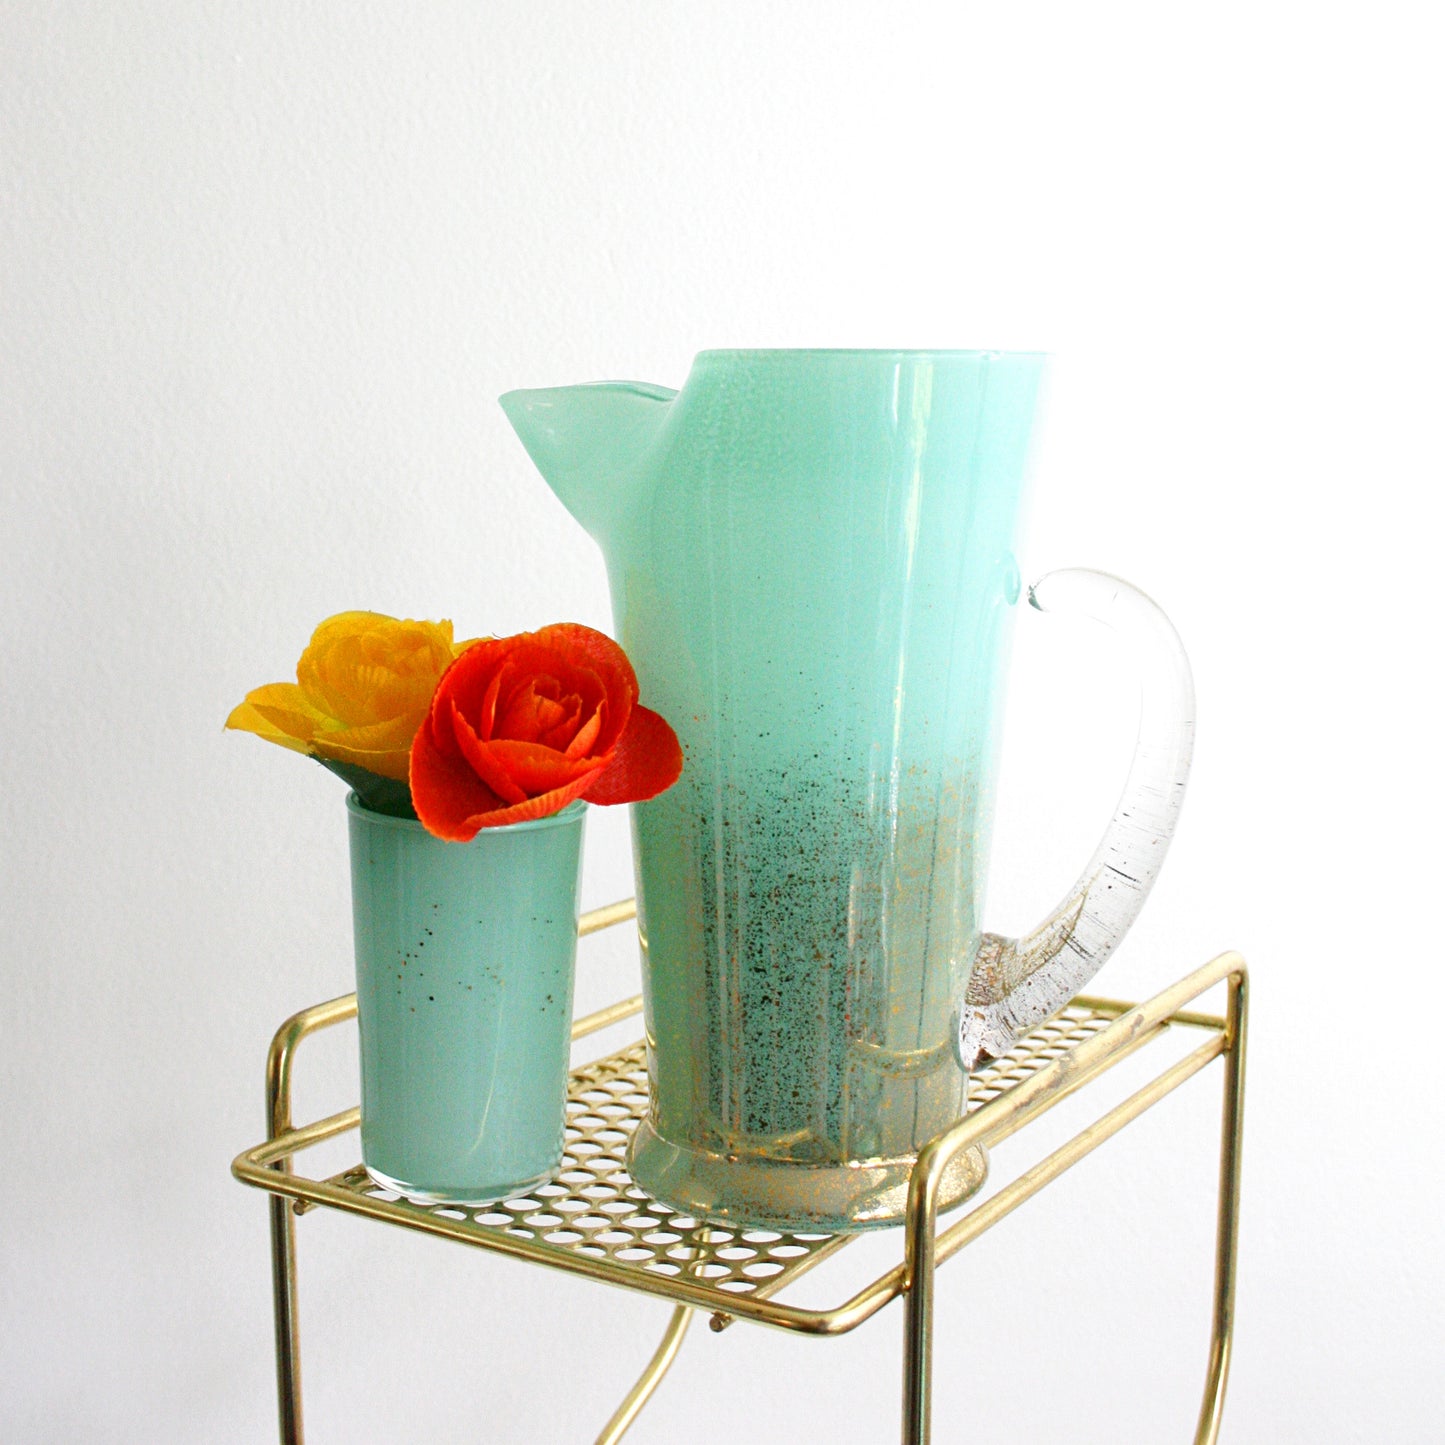 SOLD - Mid Century Modern Aqua and Gold Maritni Pitcher / Vintage Cocktail Pitcher and Glass